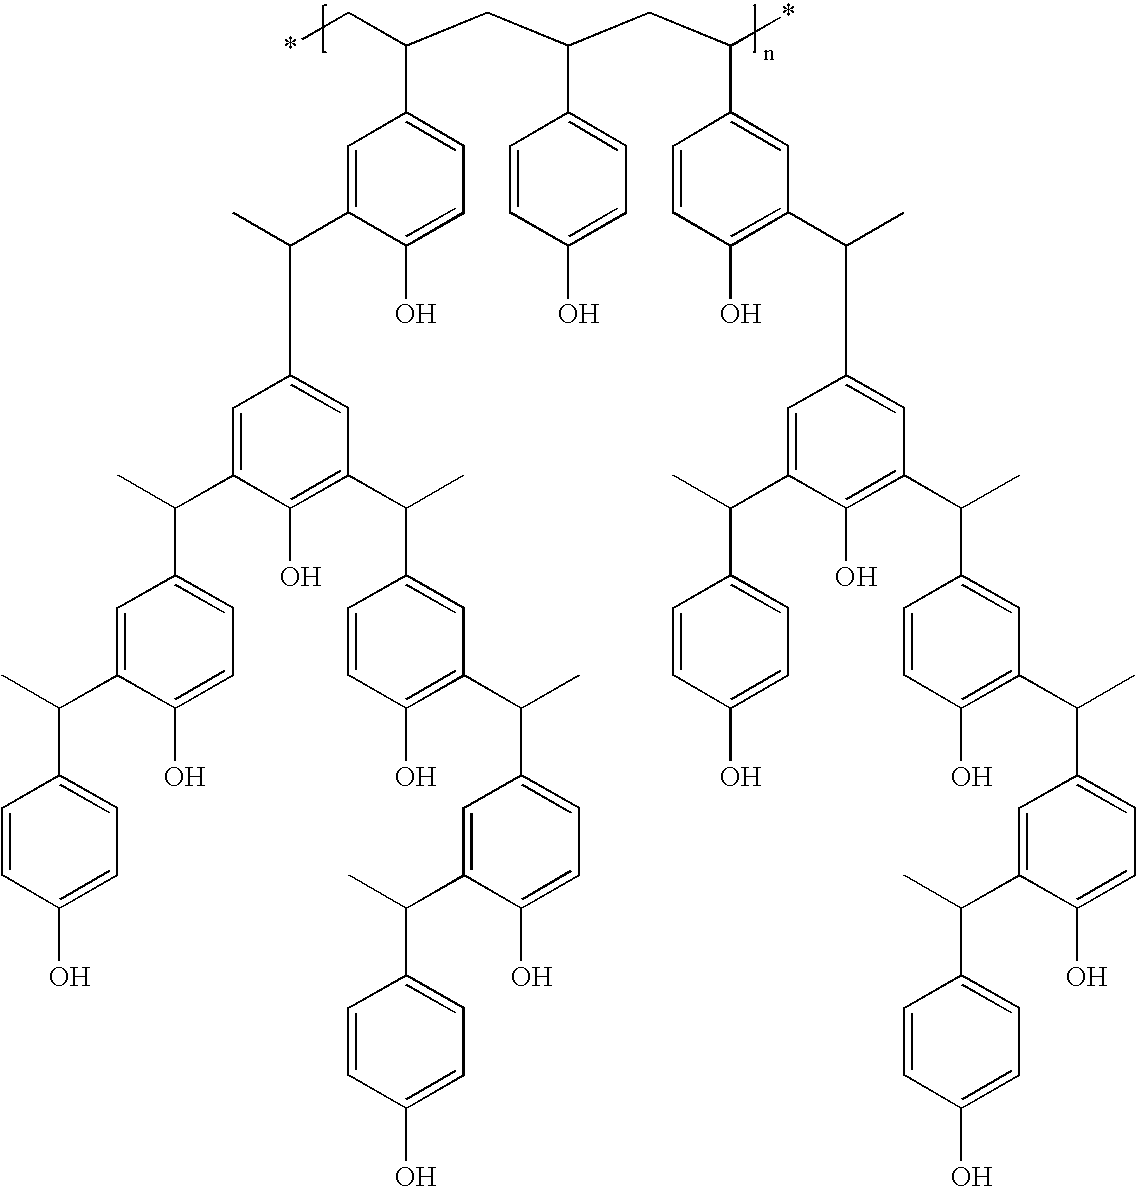 Derivatized polyhydroxystyrenes (DPHS) with a novolak type structure and blocked DPHS (BDPHS) and processes for preparing the same